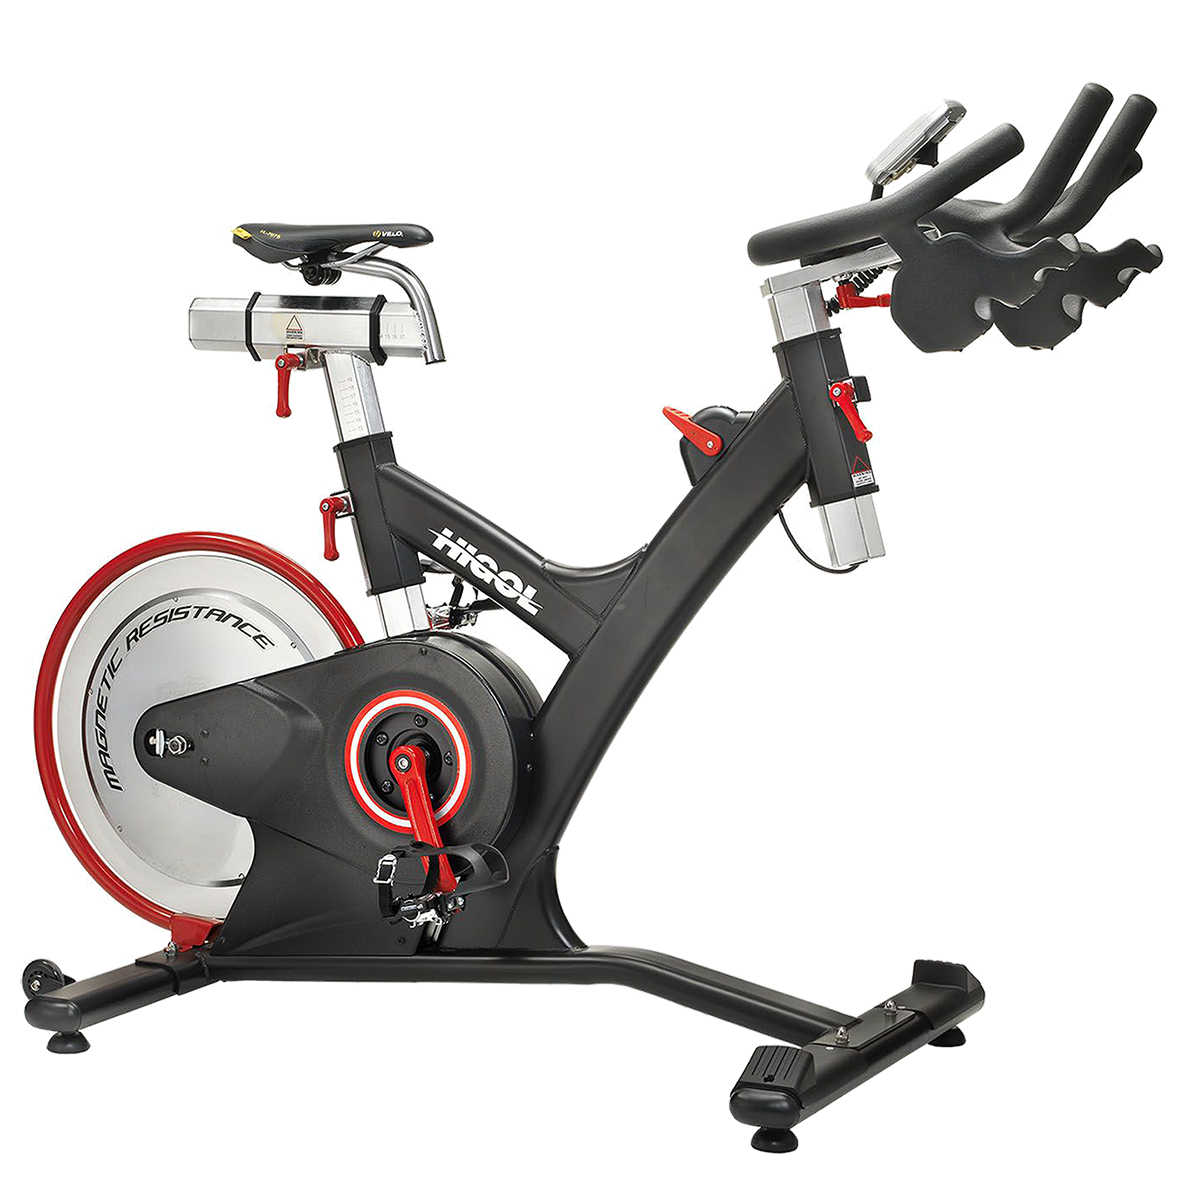 HRM-72
Best Fitness Equipment.
Smooth and quiet for comfortable riding.
Rear drive magnetic brake system
Magnetic Resistance Bike